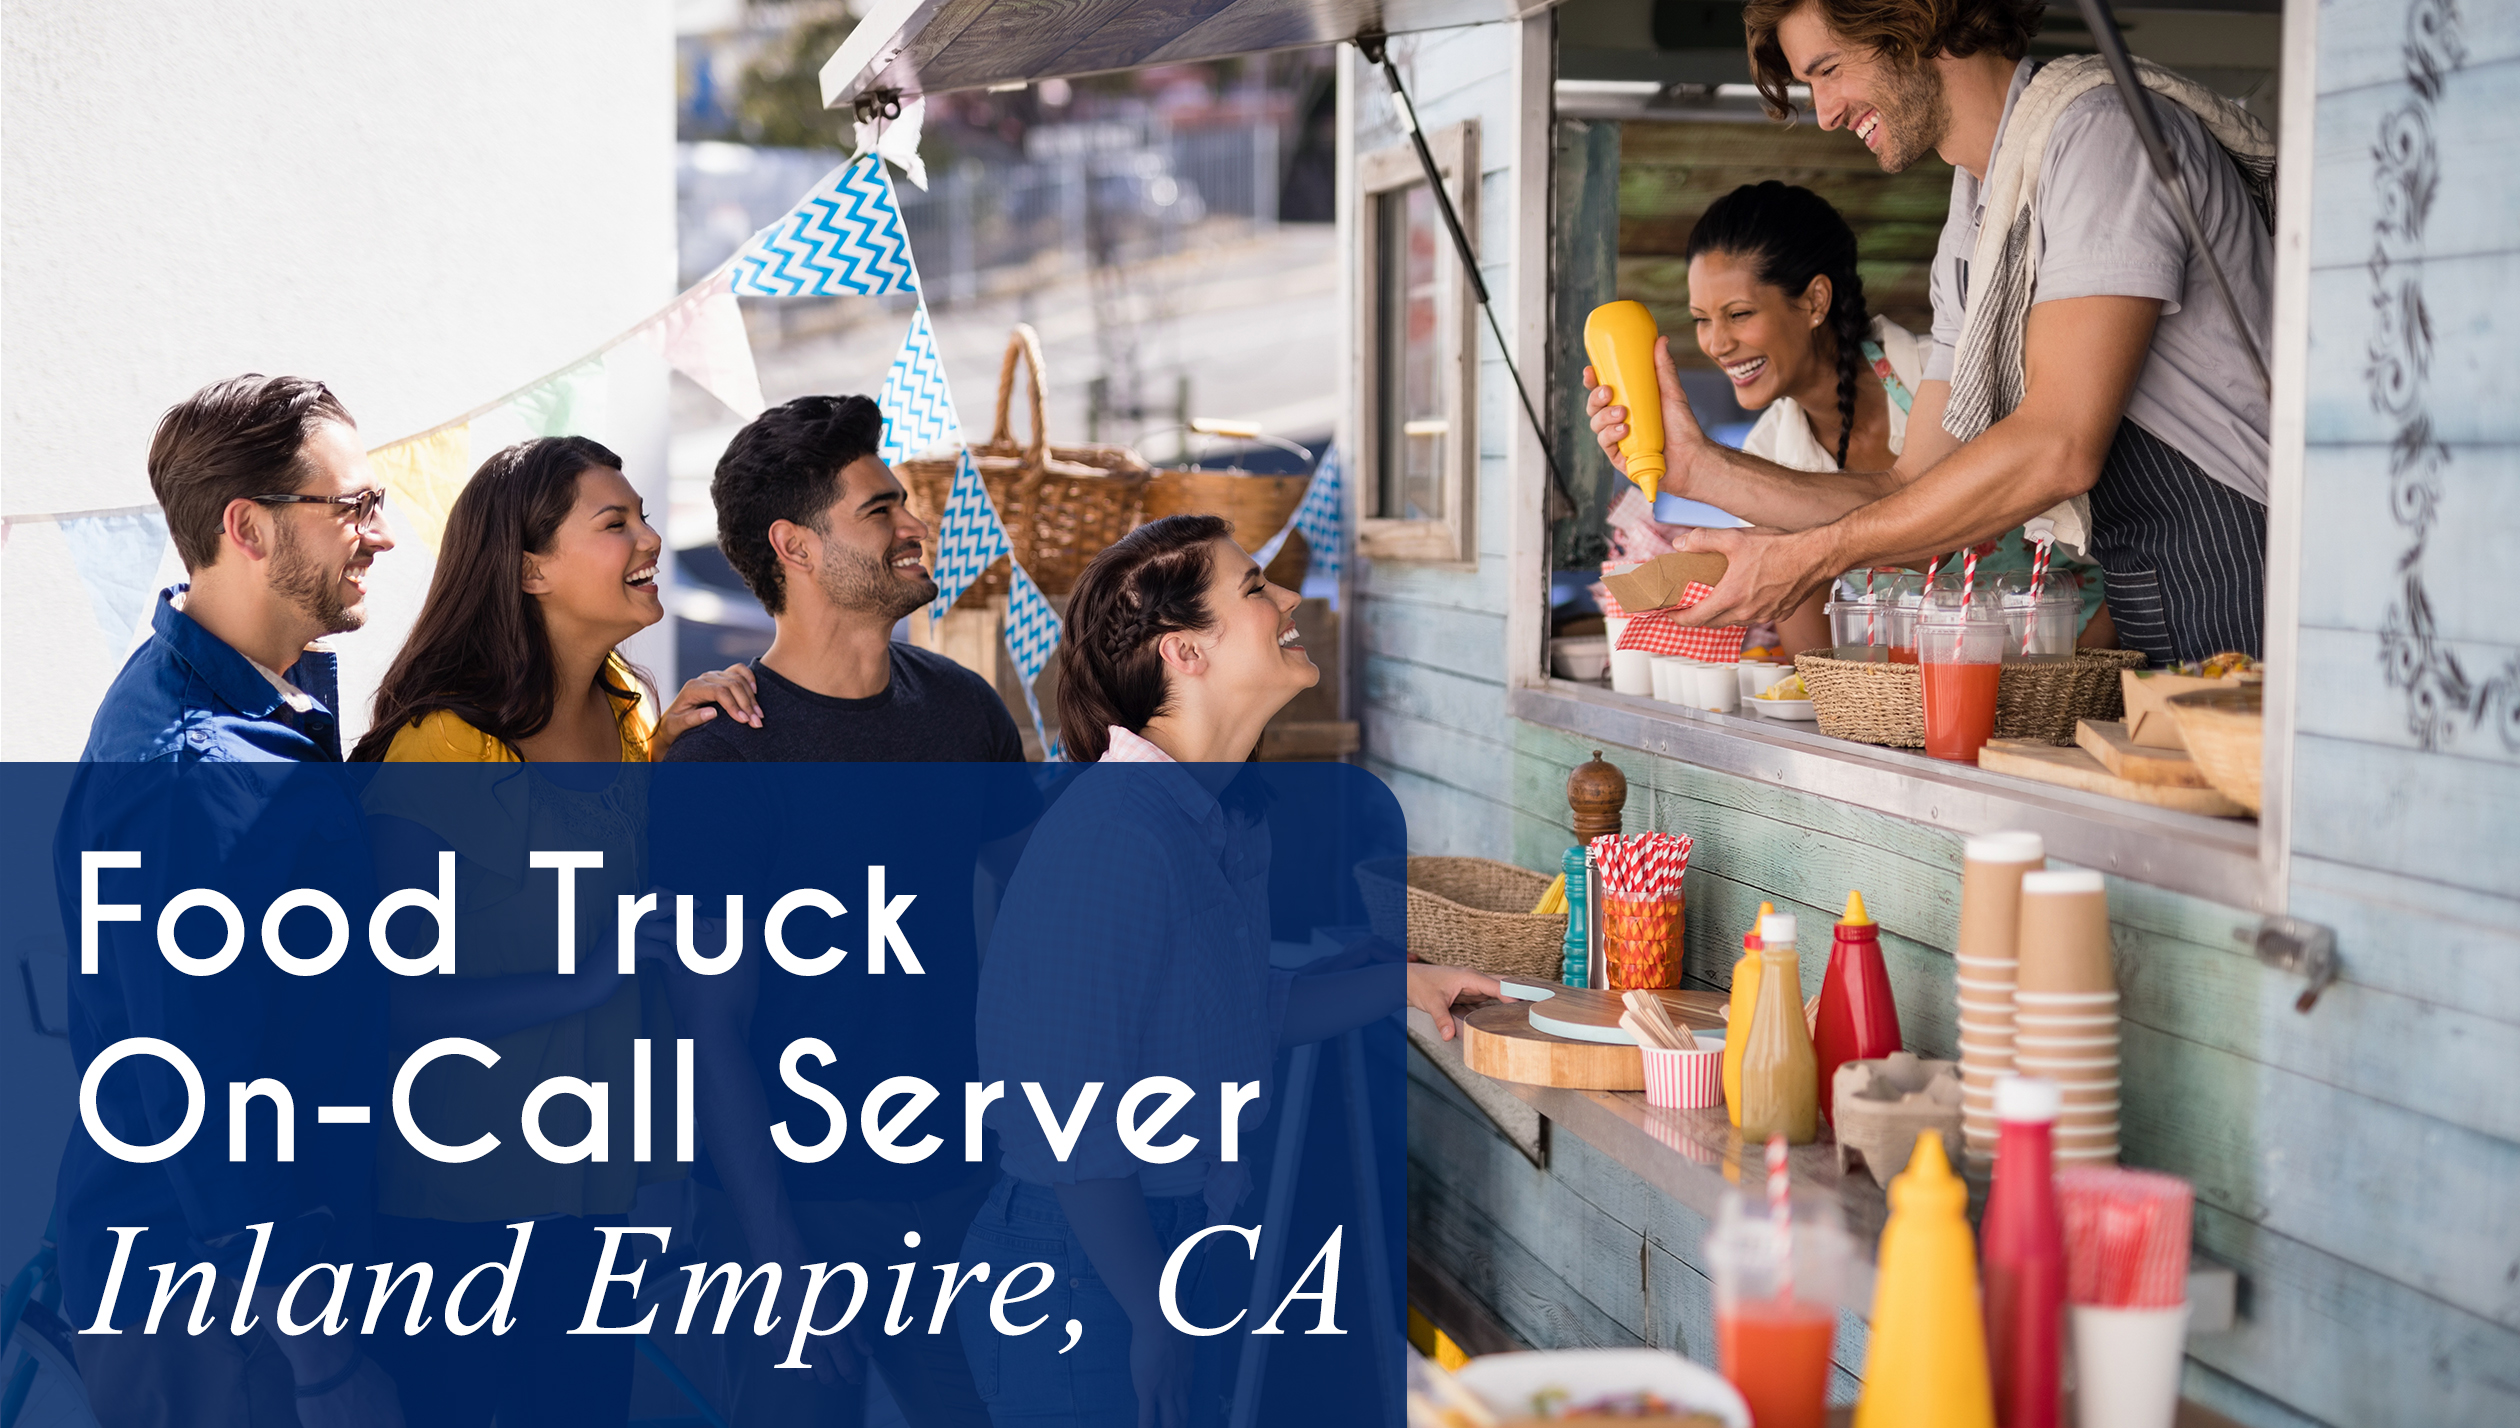 Now Hiring Food Truck On-Call Servers throughout the Inland Empire, CA